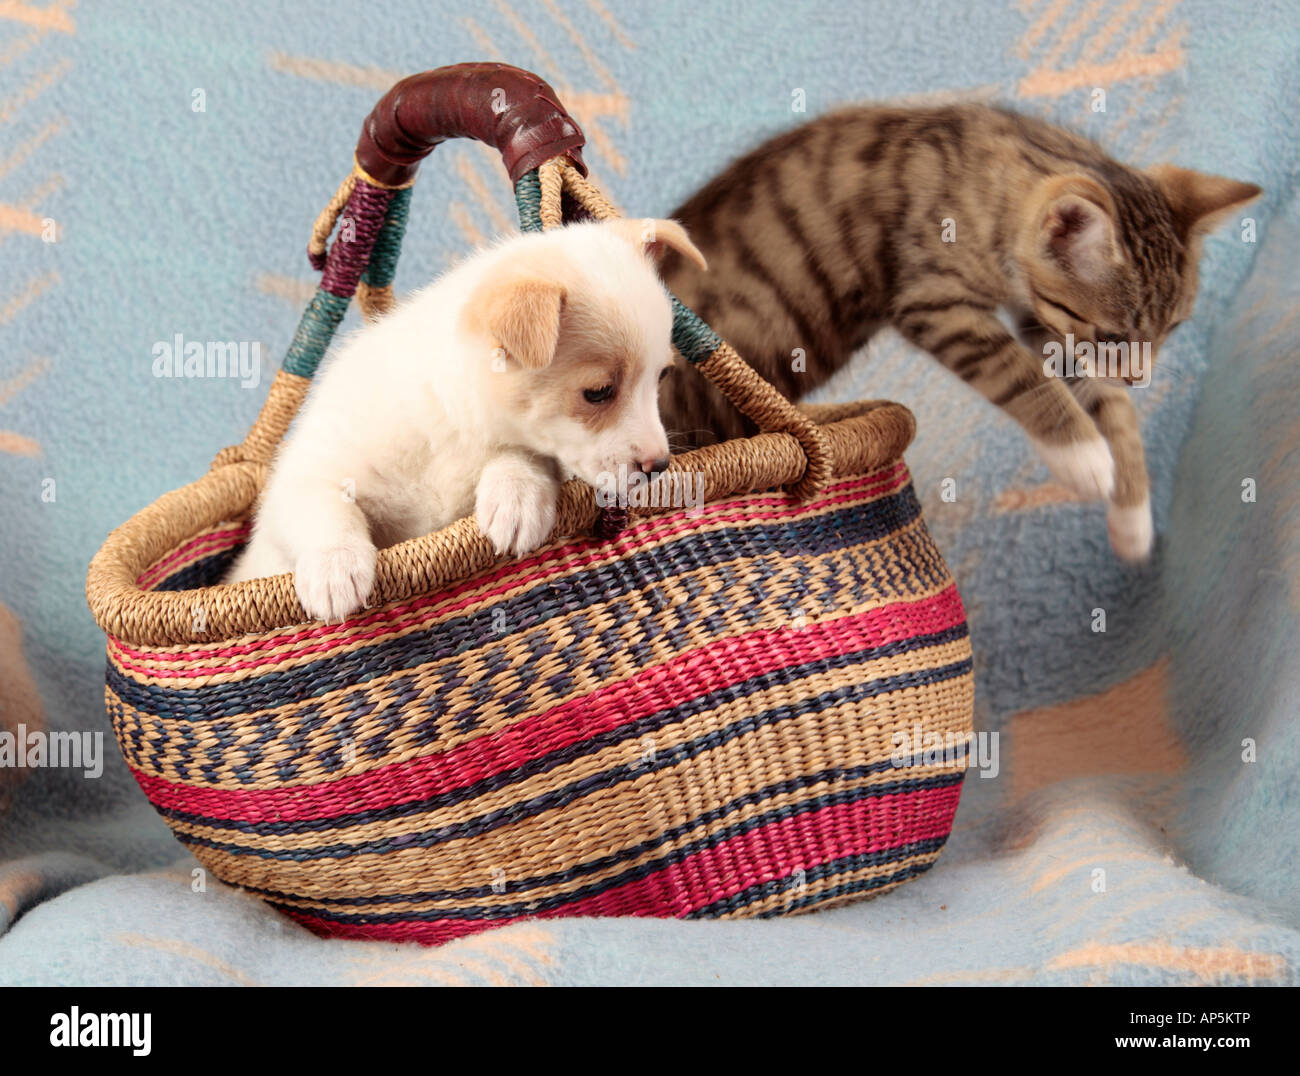 mongrel pup and young cat together in a basket, the cat just jumping out Stock Photo